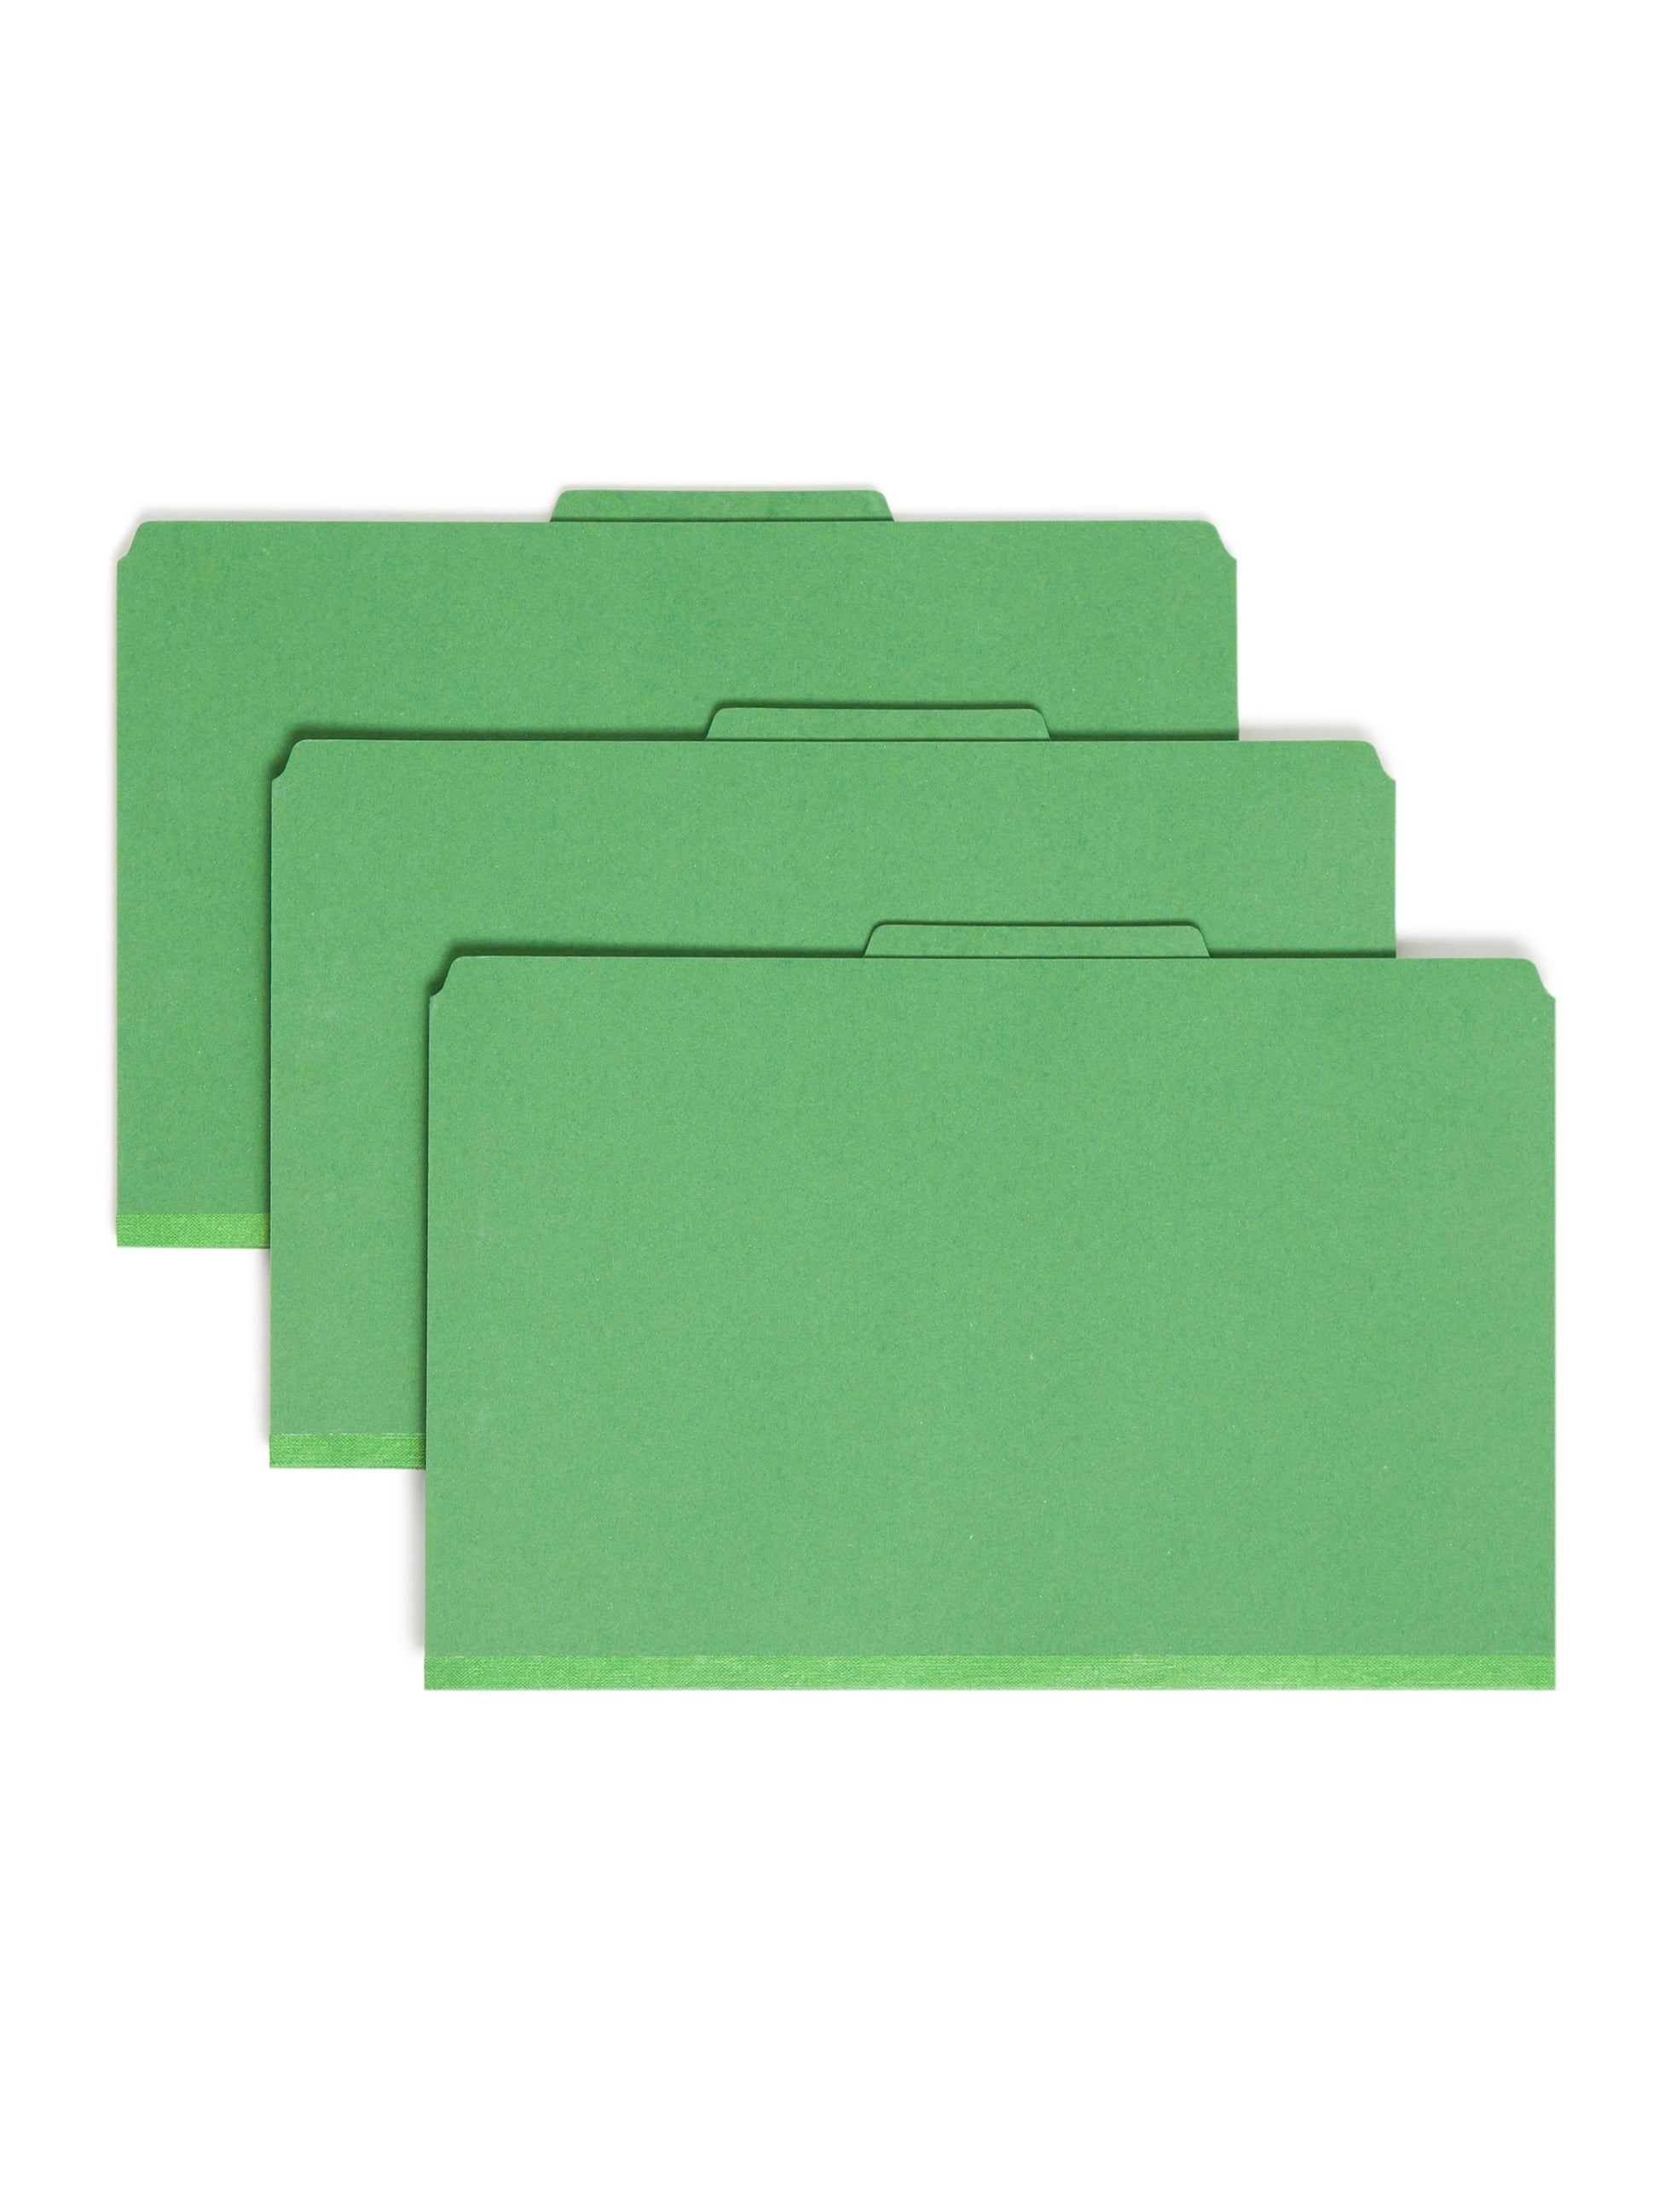 SafeSHIELD® Pressboard Classification File Folders, 2 Dividers, 2 inch Expansion, 2/5-Cut Tab, Green Color, Legal Size, Set of 0, 30086486190337